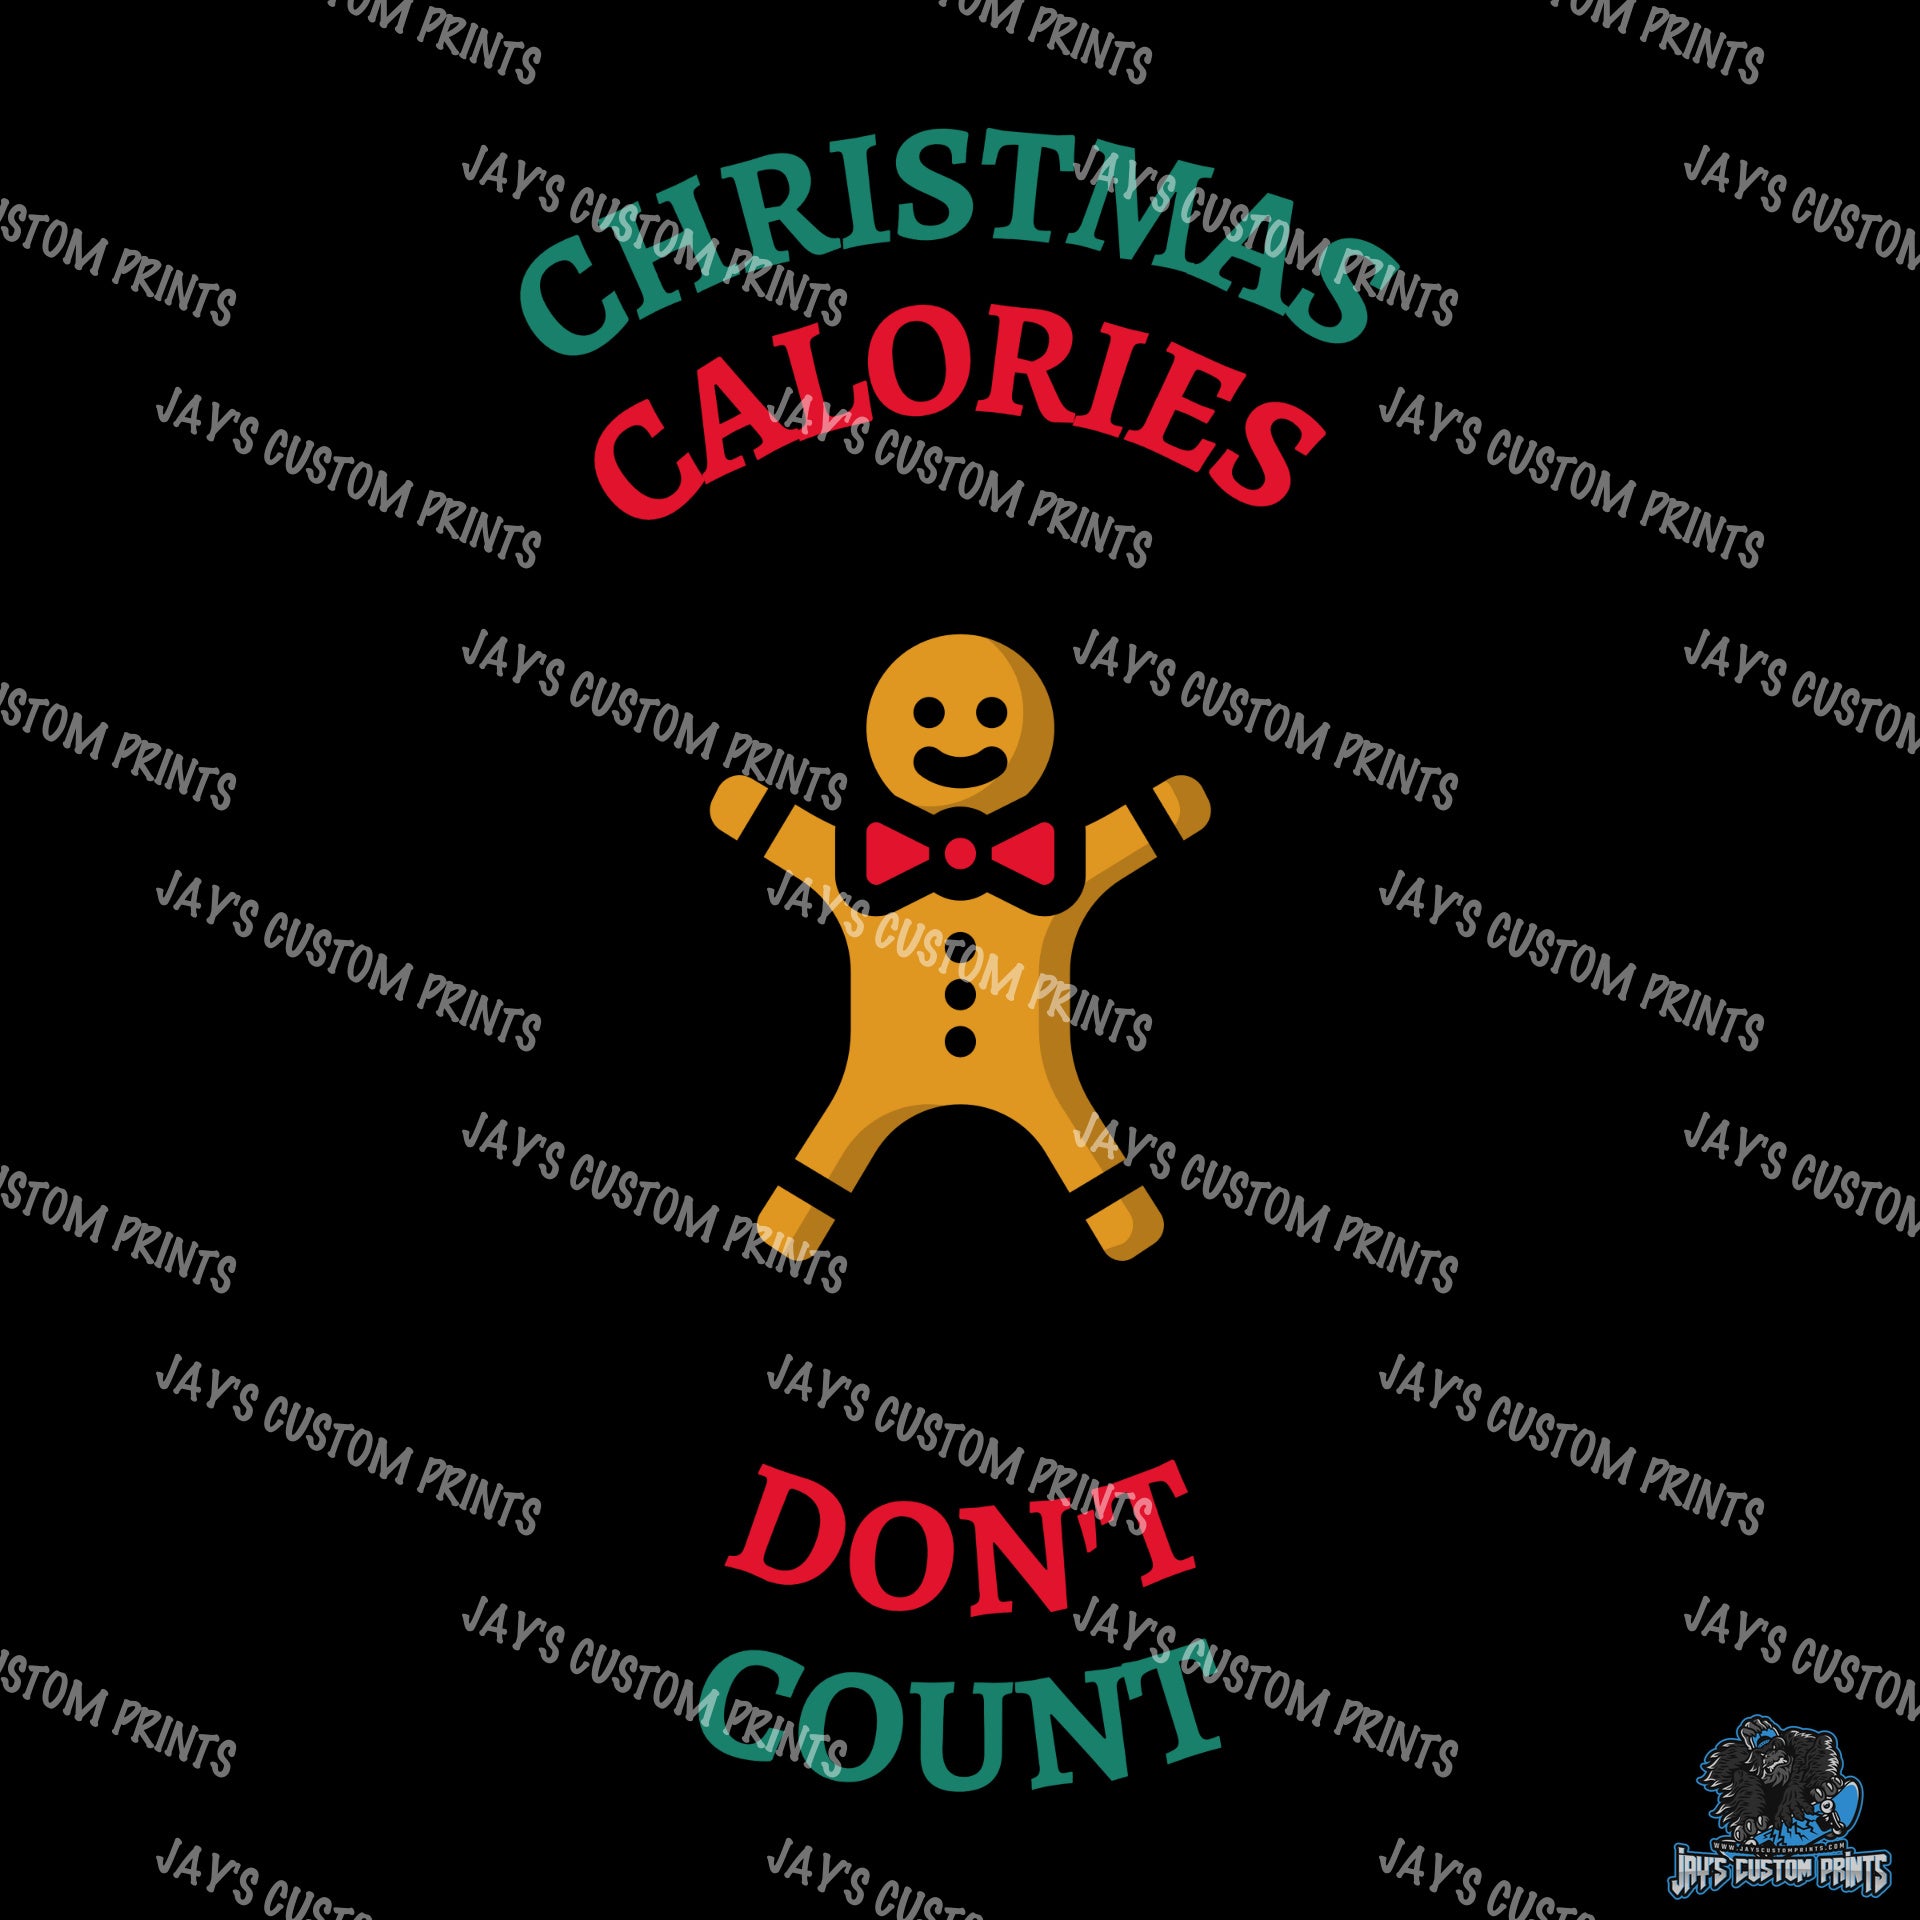 Christmas Calories Don't Count - Gingerbread Man